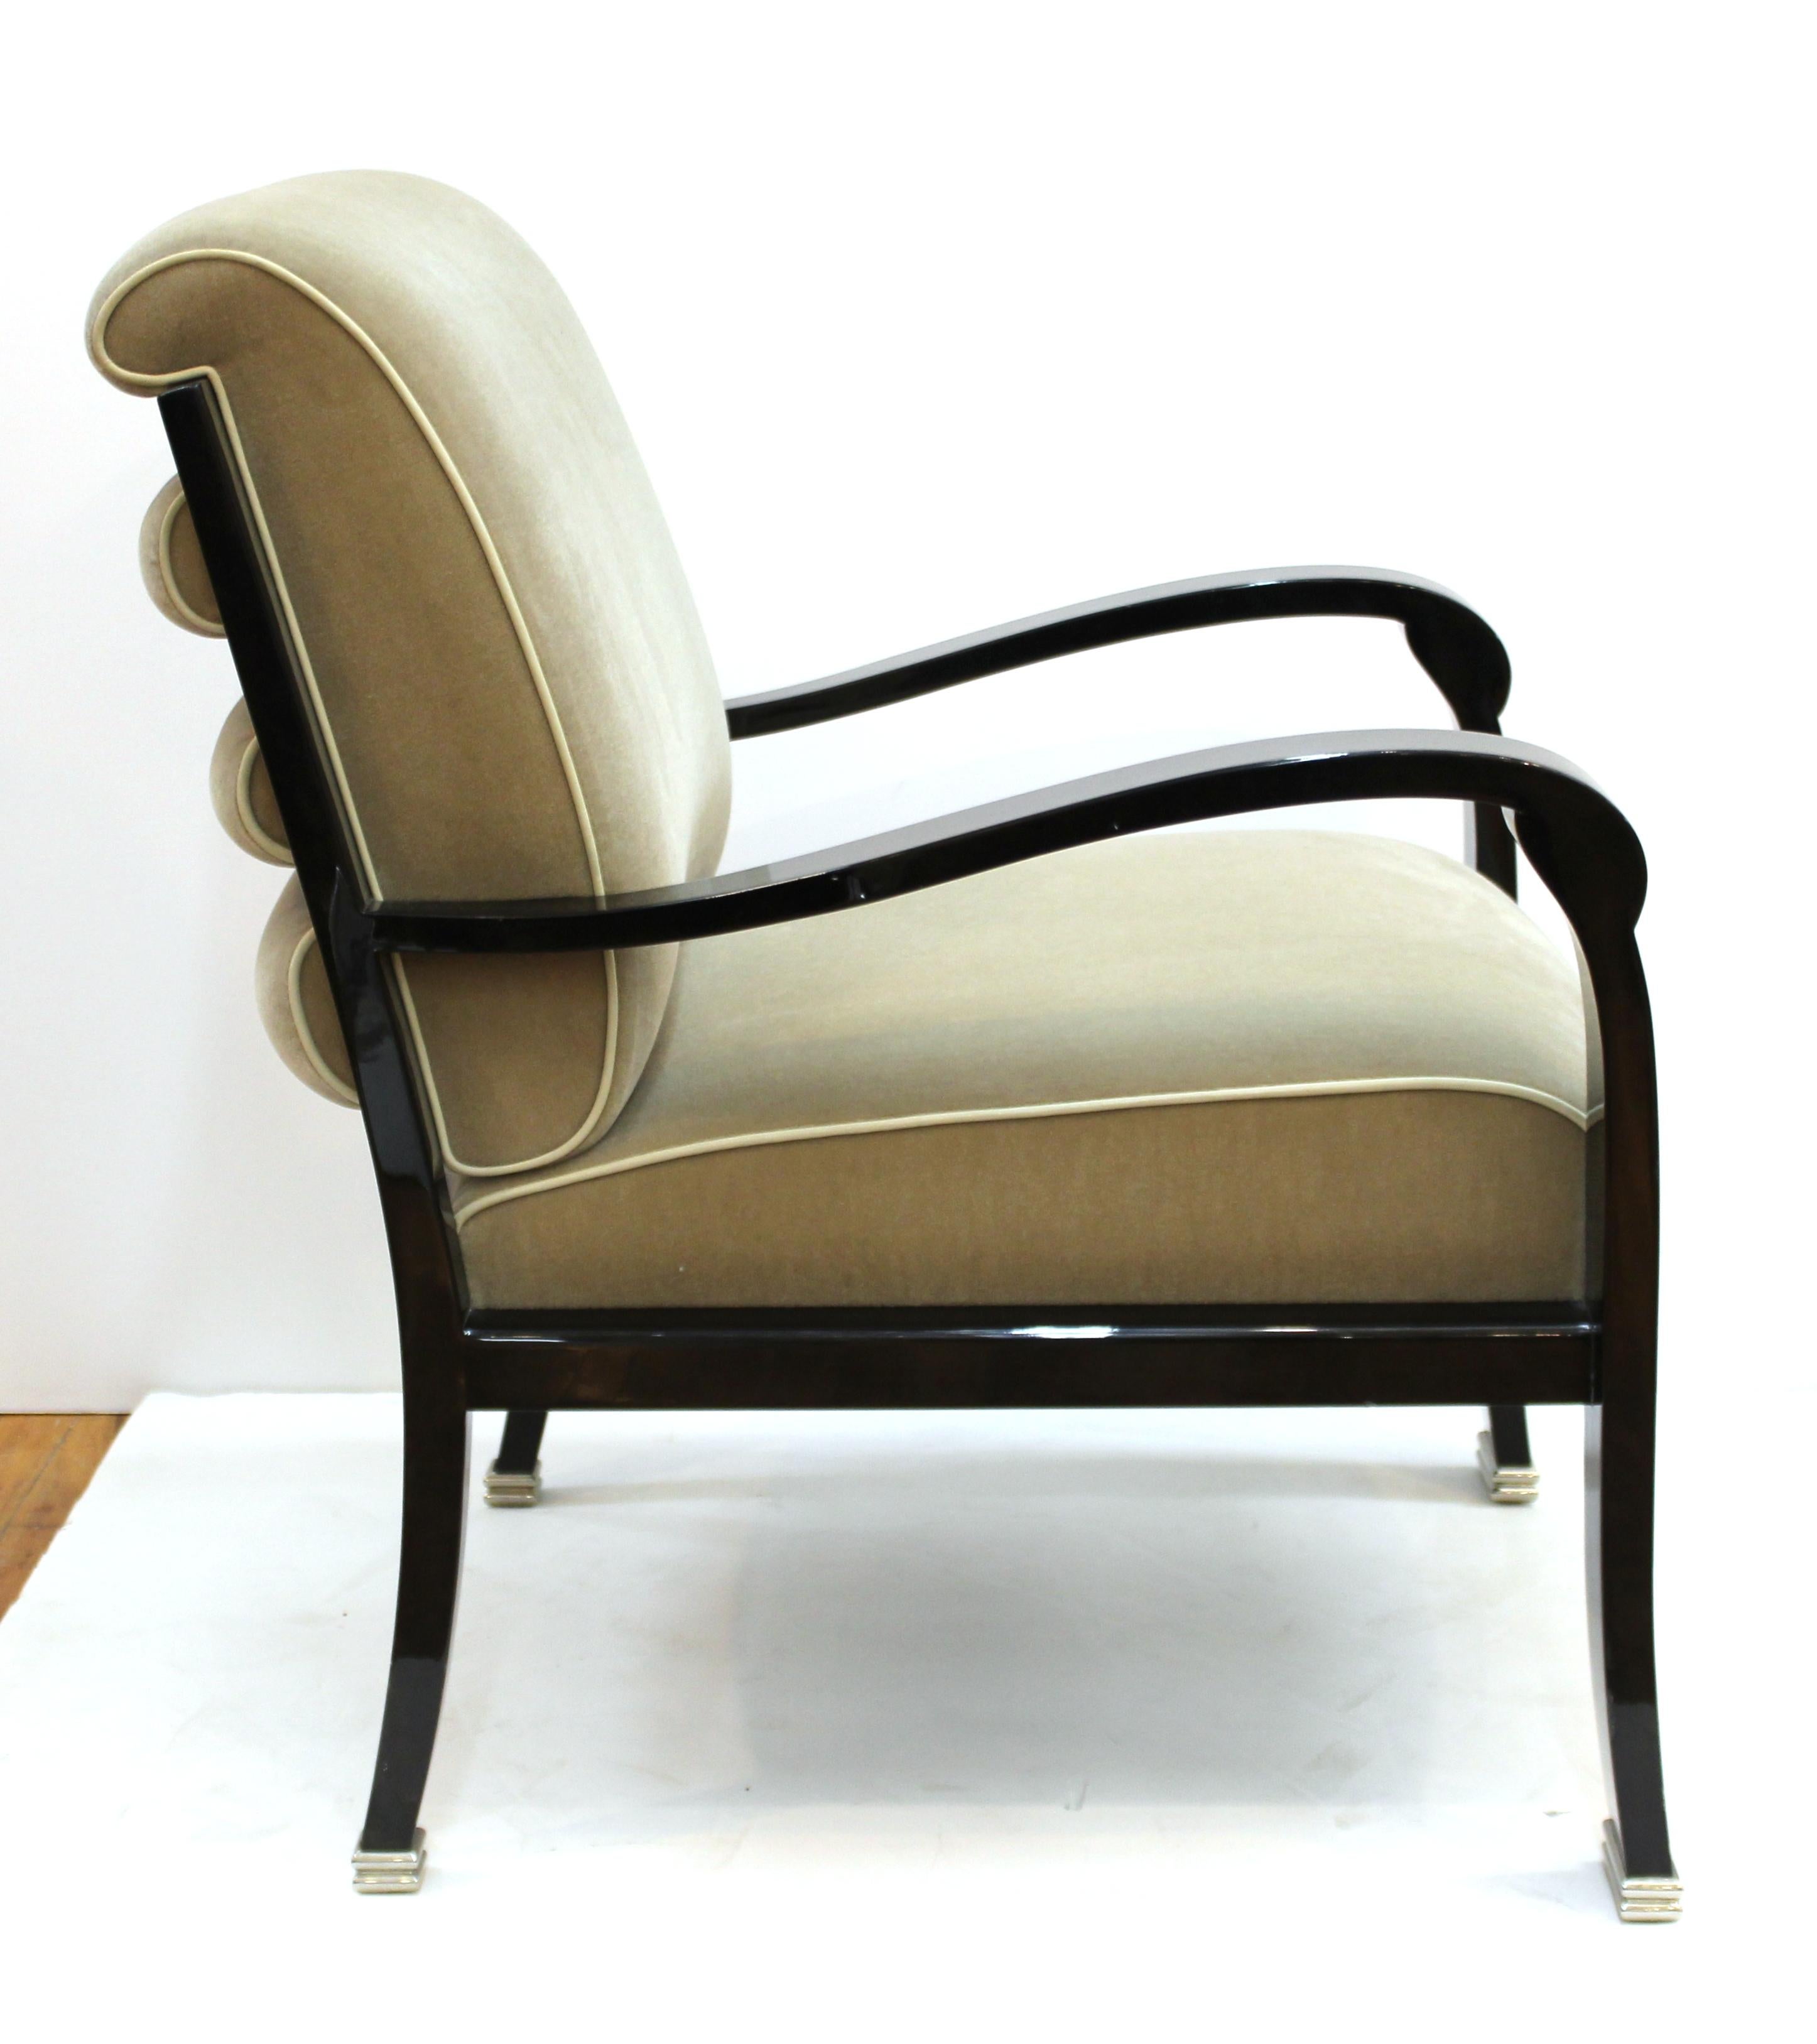 Sally Sirkin Lewis for J. Robert Scott Art Deco Revival Black Lacquer Armchair im Zustand „Gut“ in New York, NY